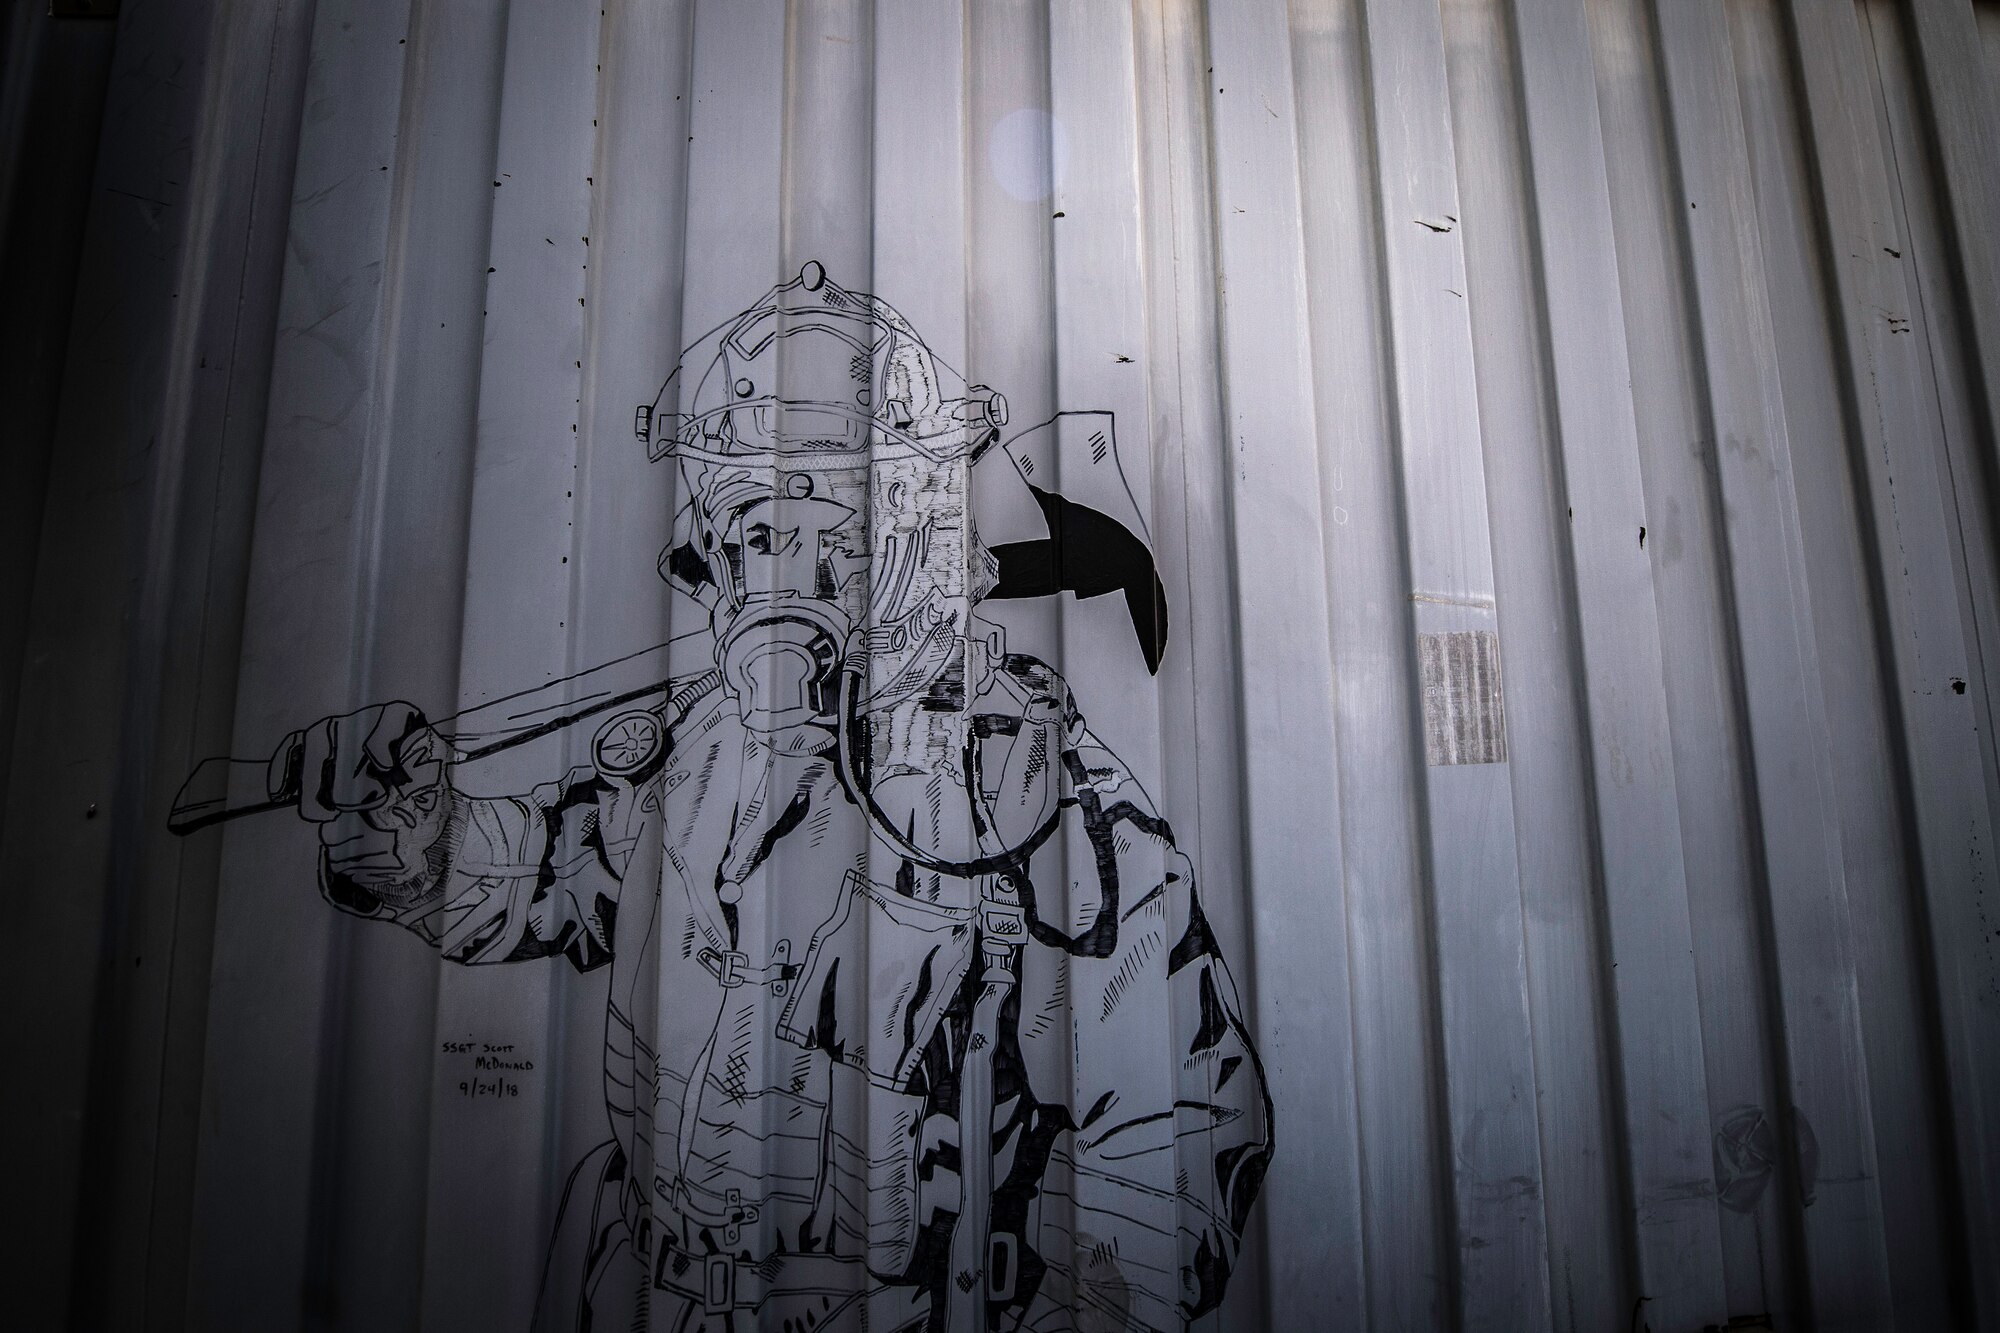 A drawing of a firefighter is displayed on a metal trailer at the 870th Air Expeditionary Squadron fire department at Chabelley Airfield, Djibouti, June 11, 2019. The fire department is responsible for responding to fires and incidents on the flight line. (U.S. Air Force photo by Staff Sgt. Devin Boyer)